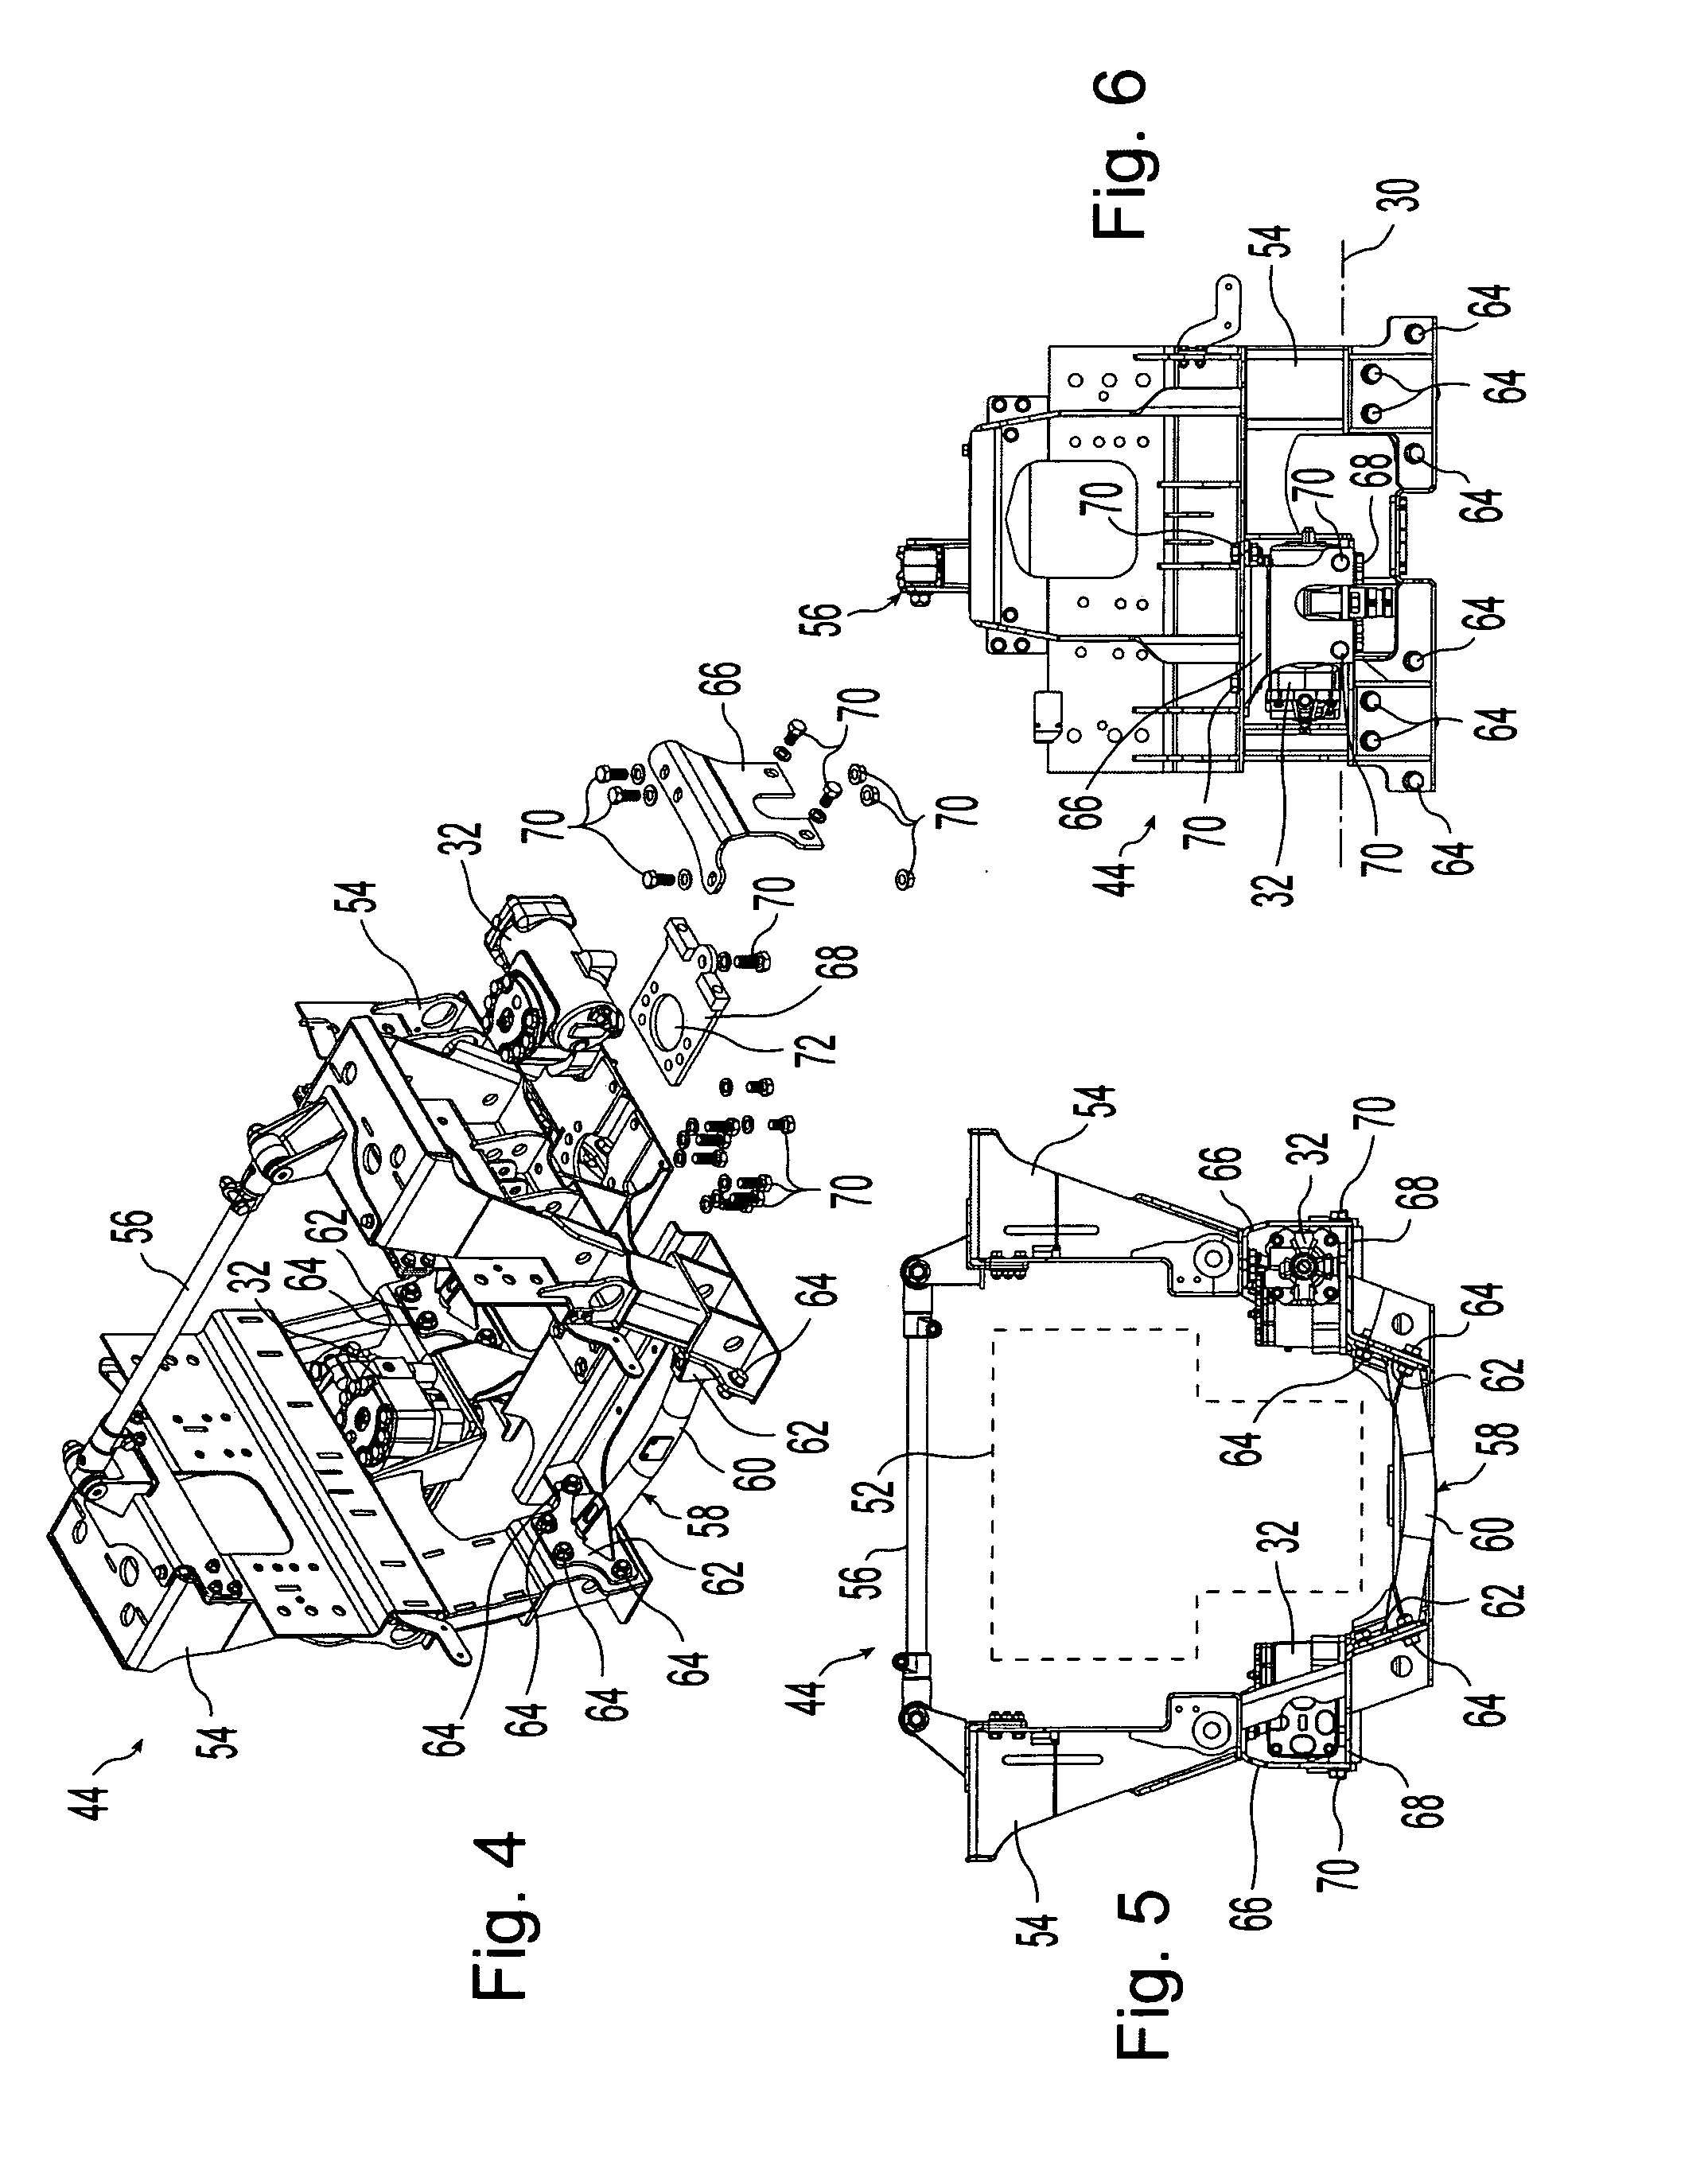 Independent suspension and steering assembly